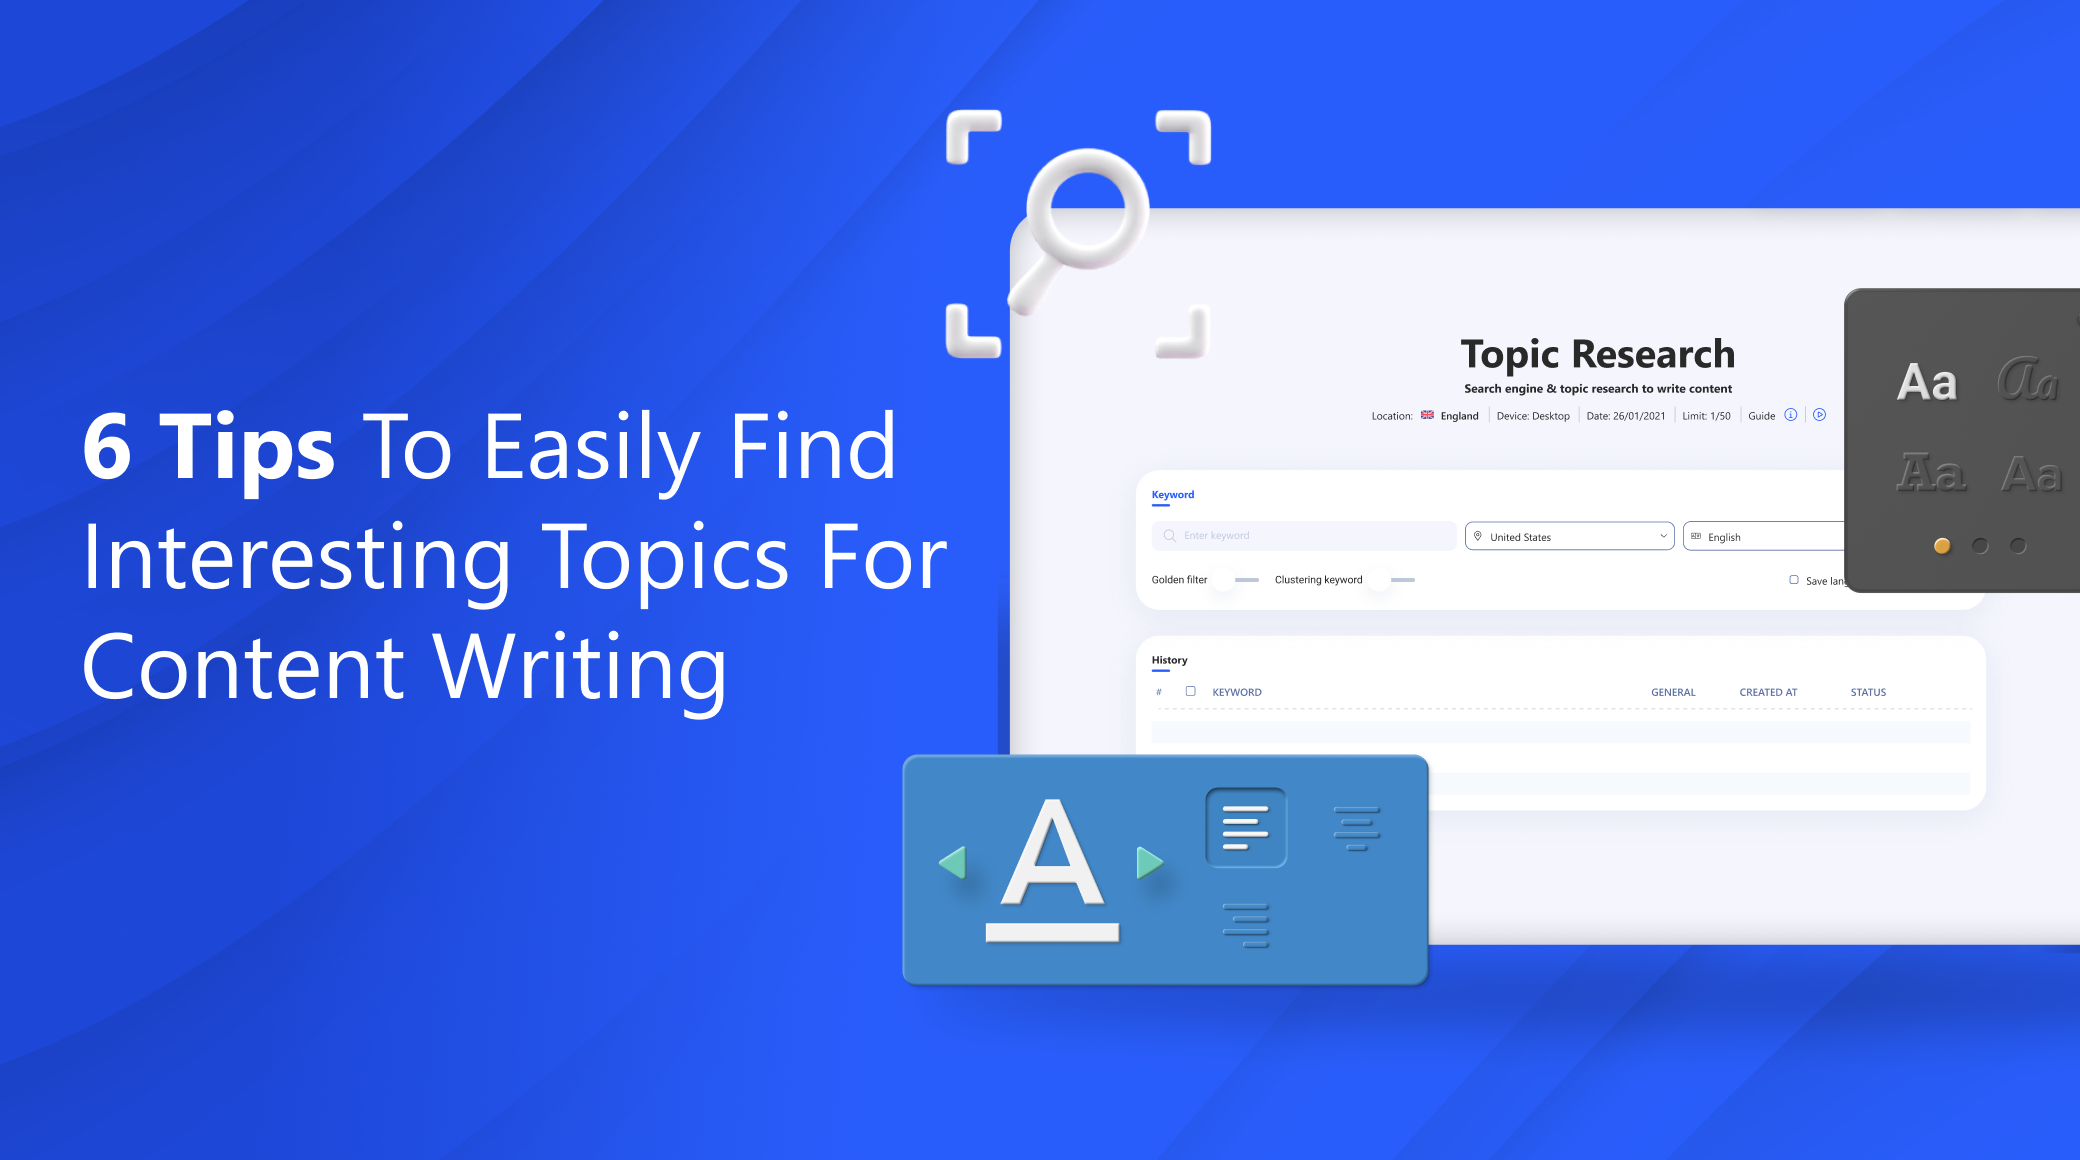 6 Proven Tips to Easily Find Interesting Topics for Content Writing